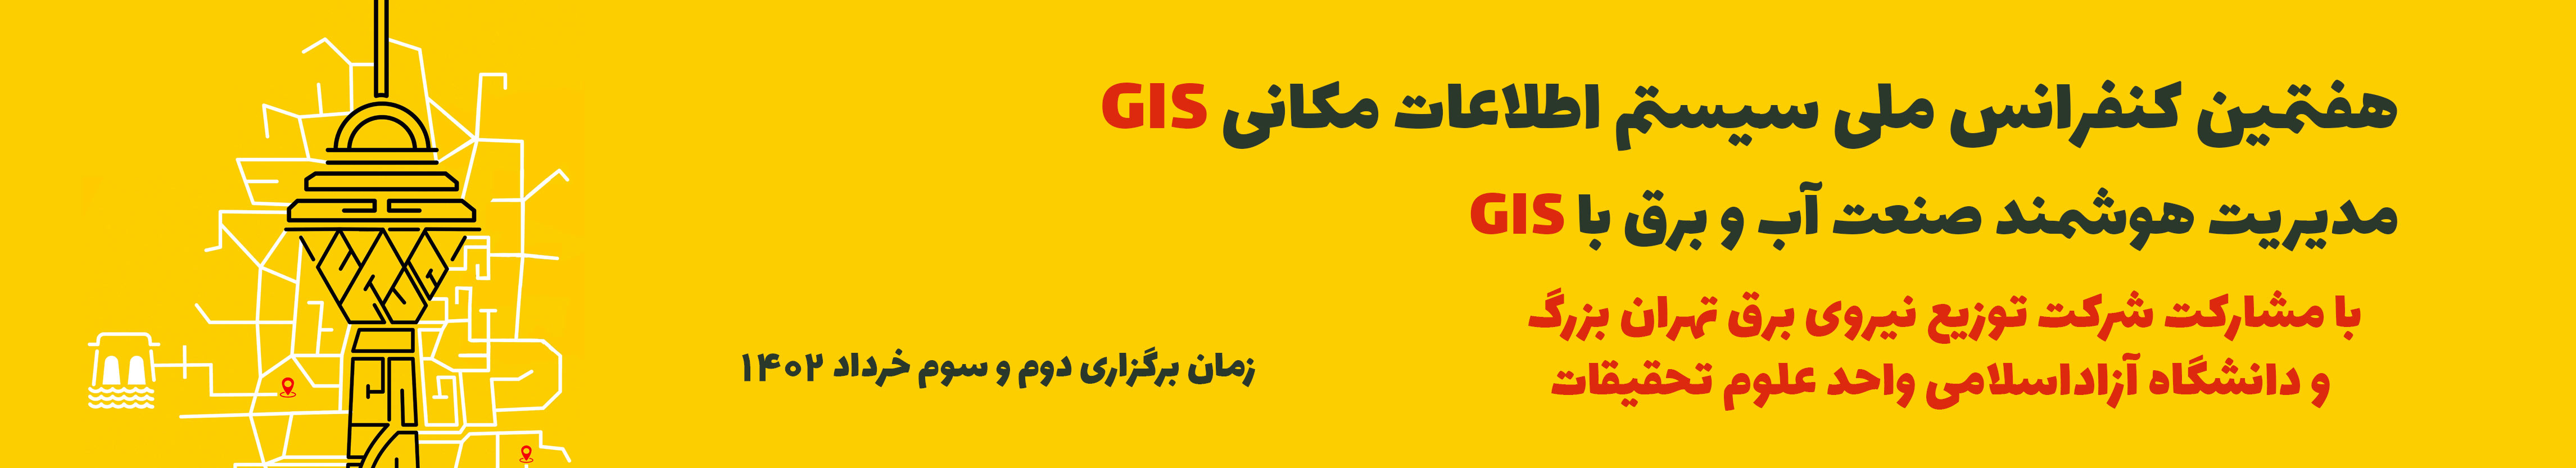 7th National Conference on Geospatial information system GIS